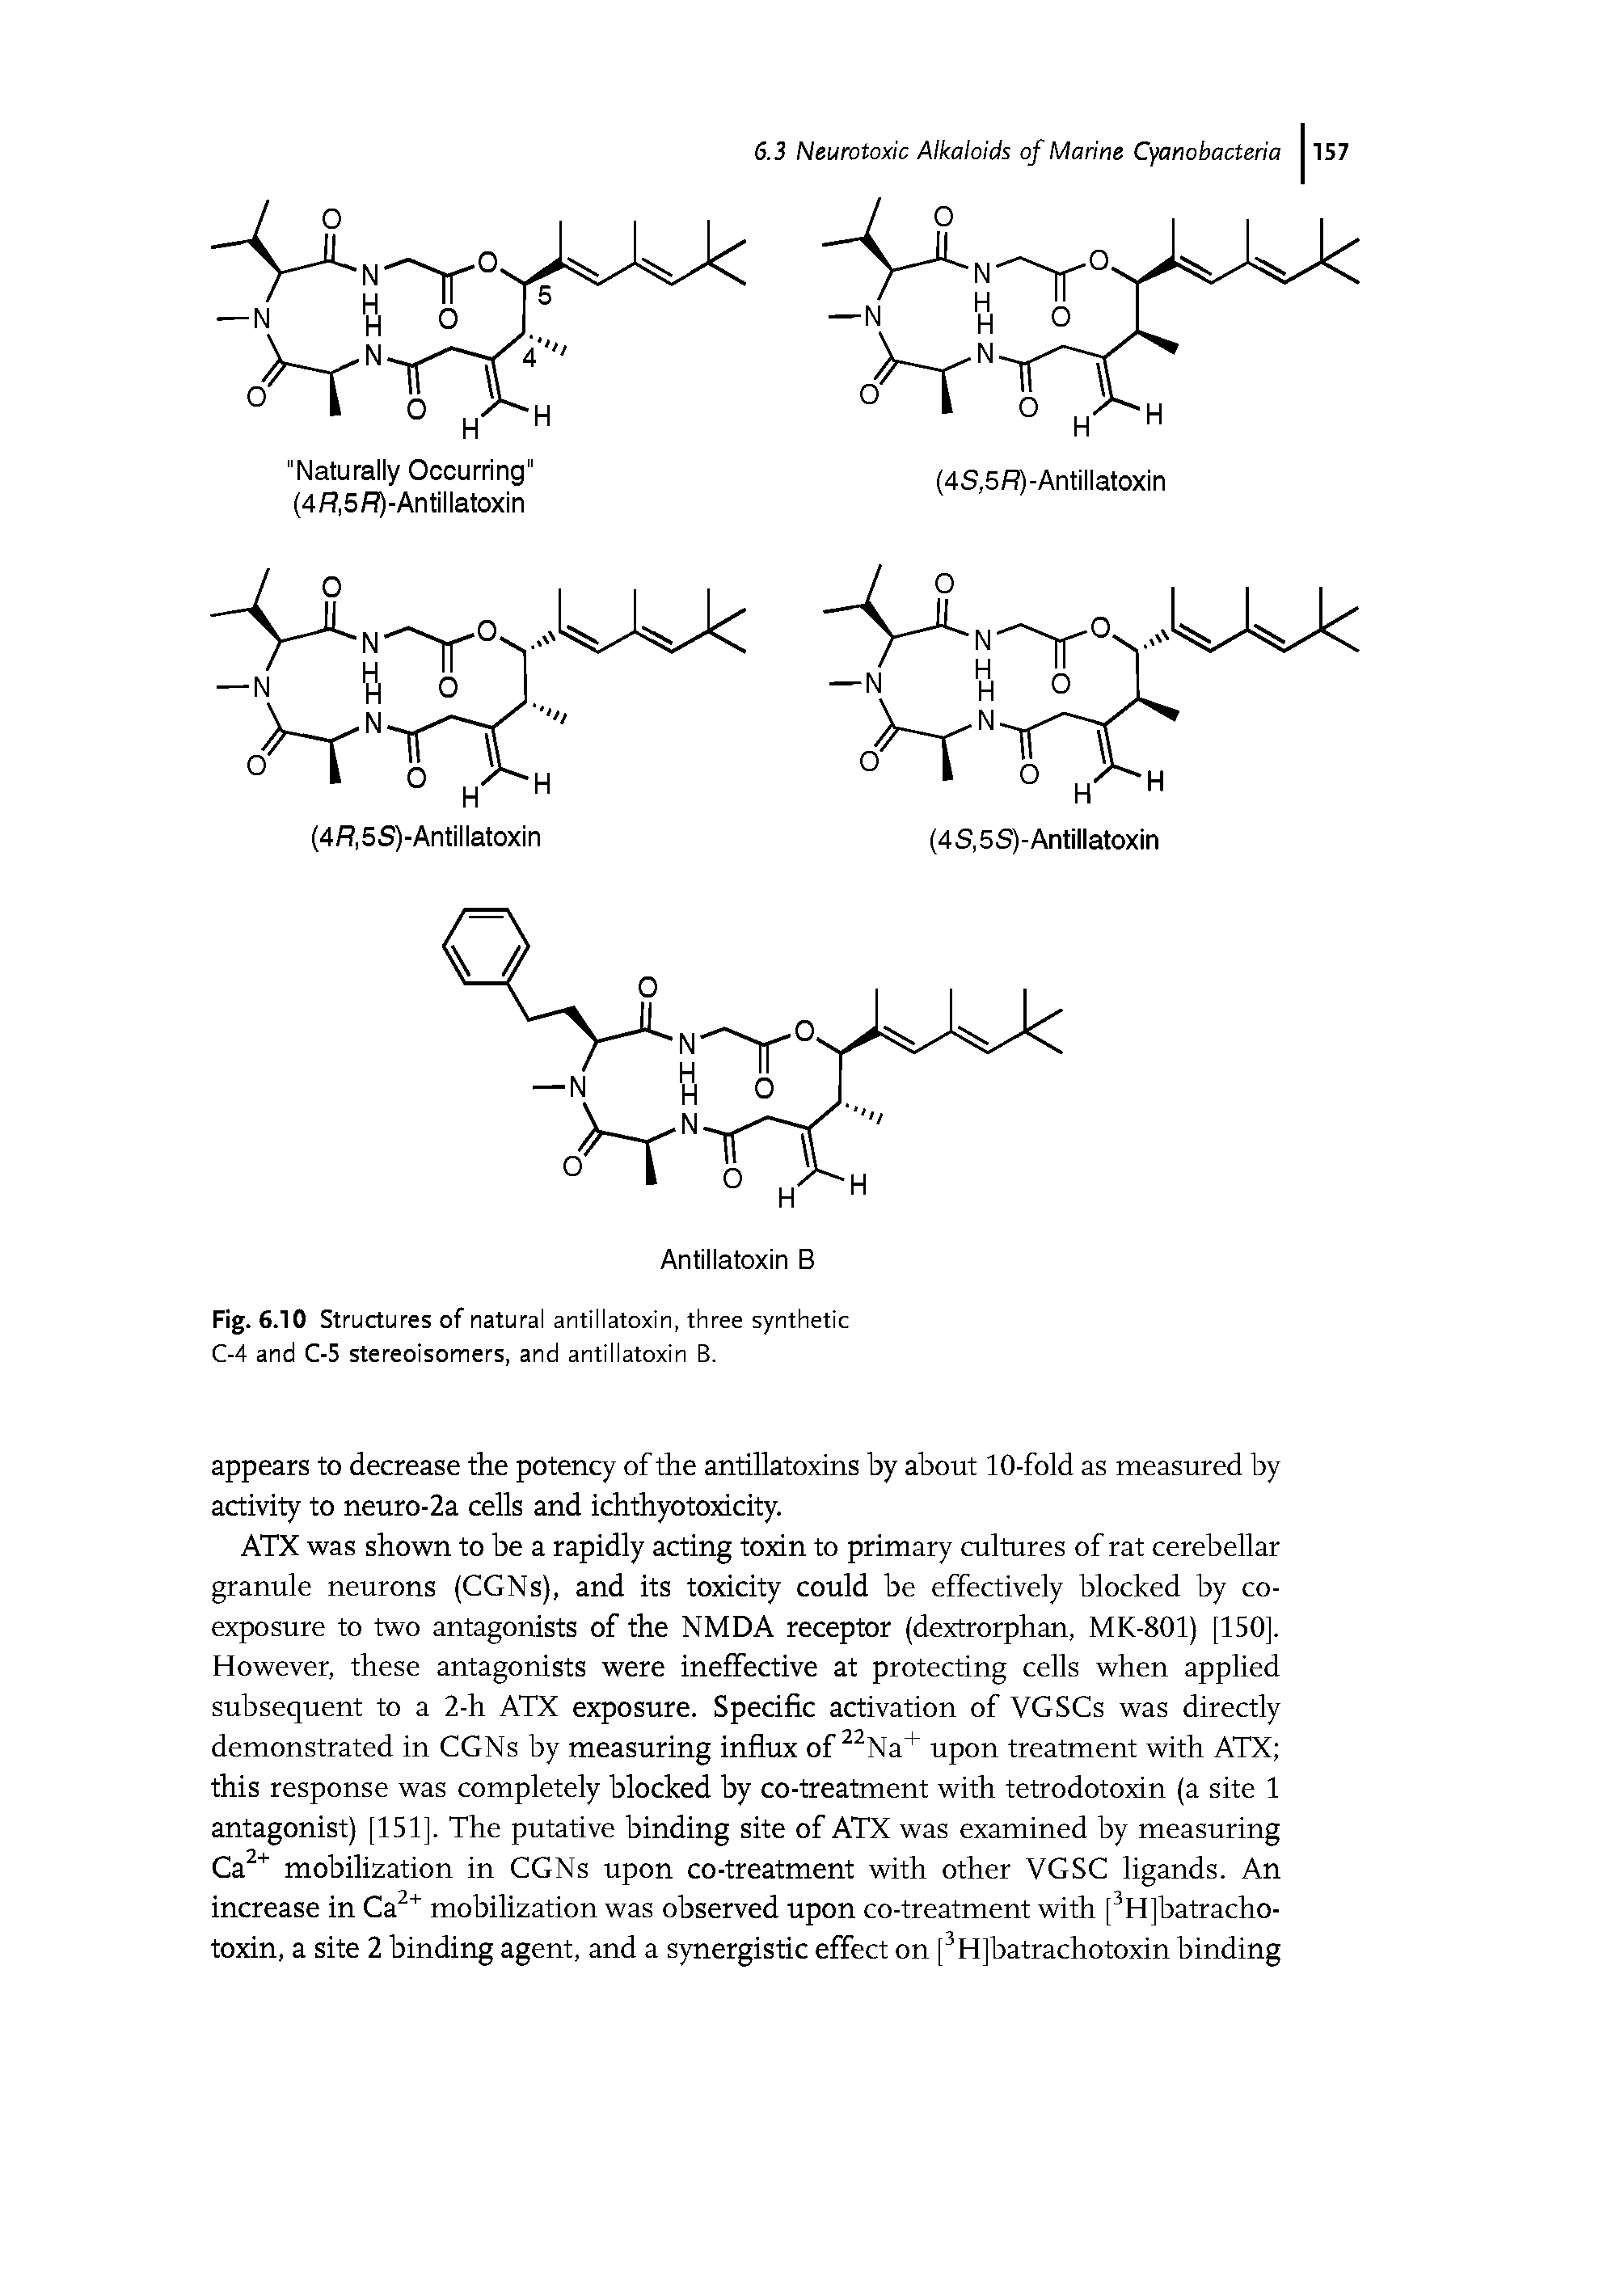 Fig. 6.10 Structures of natural antillatoxin, three synthetic C-4 and C-5 stereoisomers, and antillatoxin B.